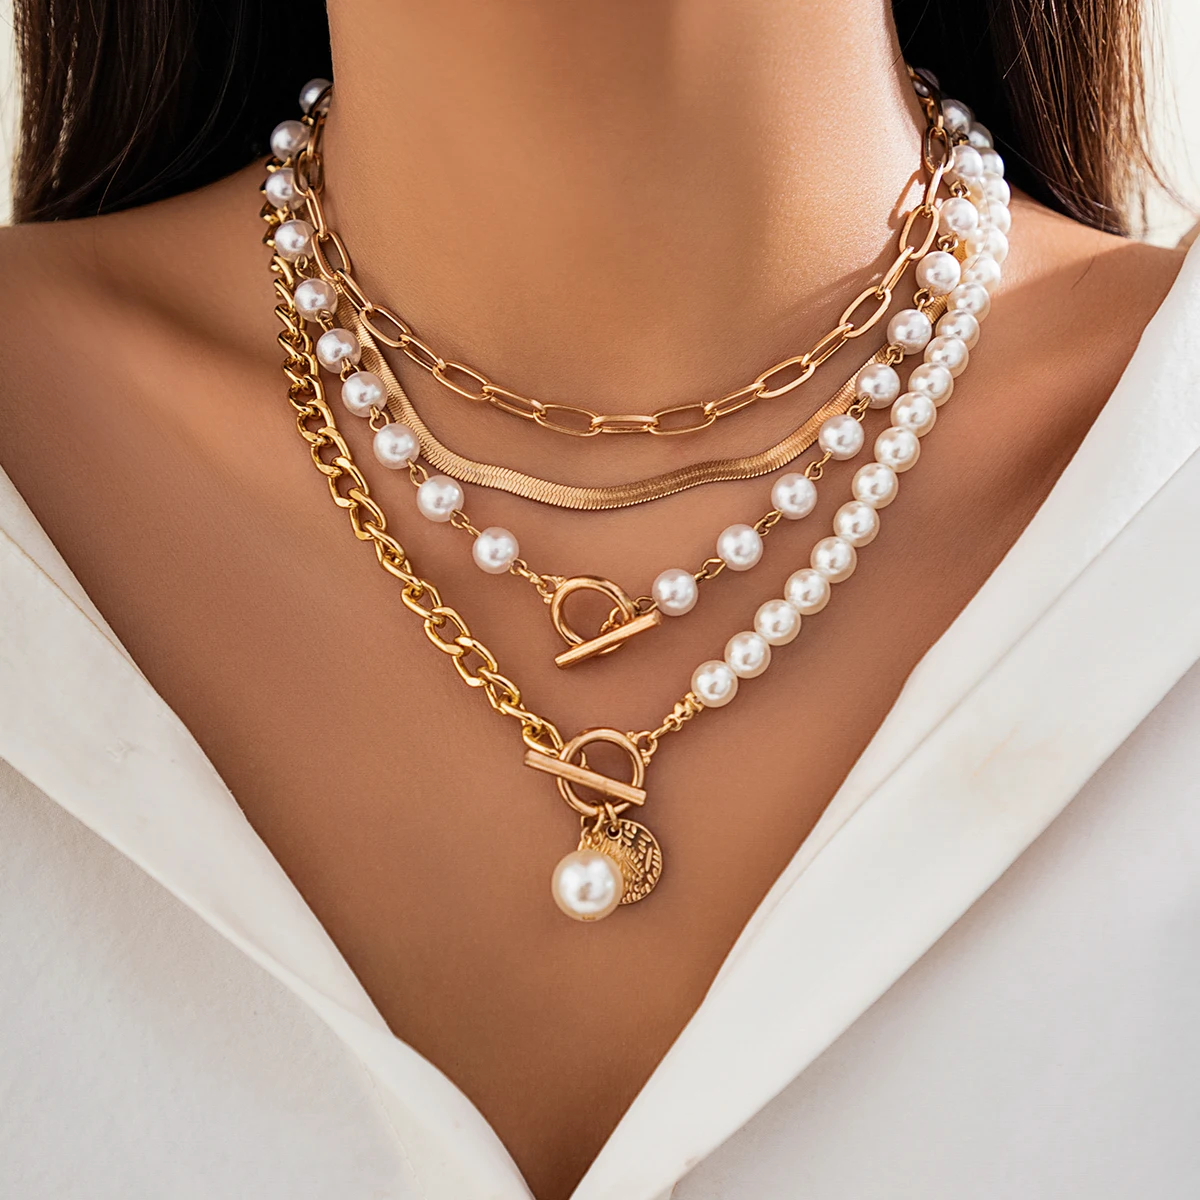 

Lacteo Trendy Imitation Pearl Charm Necklace Snake Chain Metal Link Strand Beads Splicing Choker for Women Jewelry Collar Party